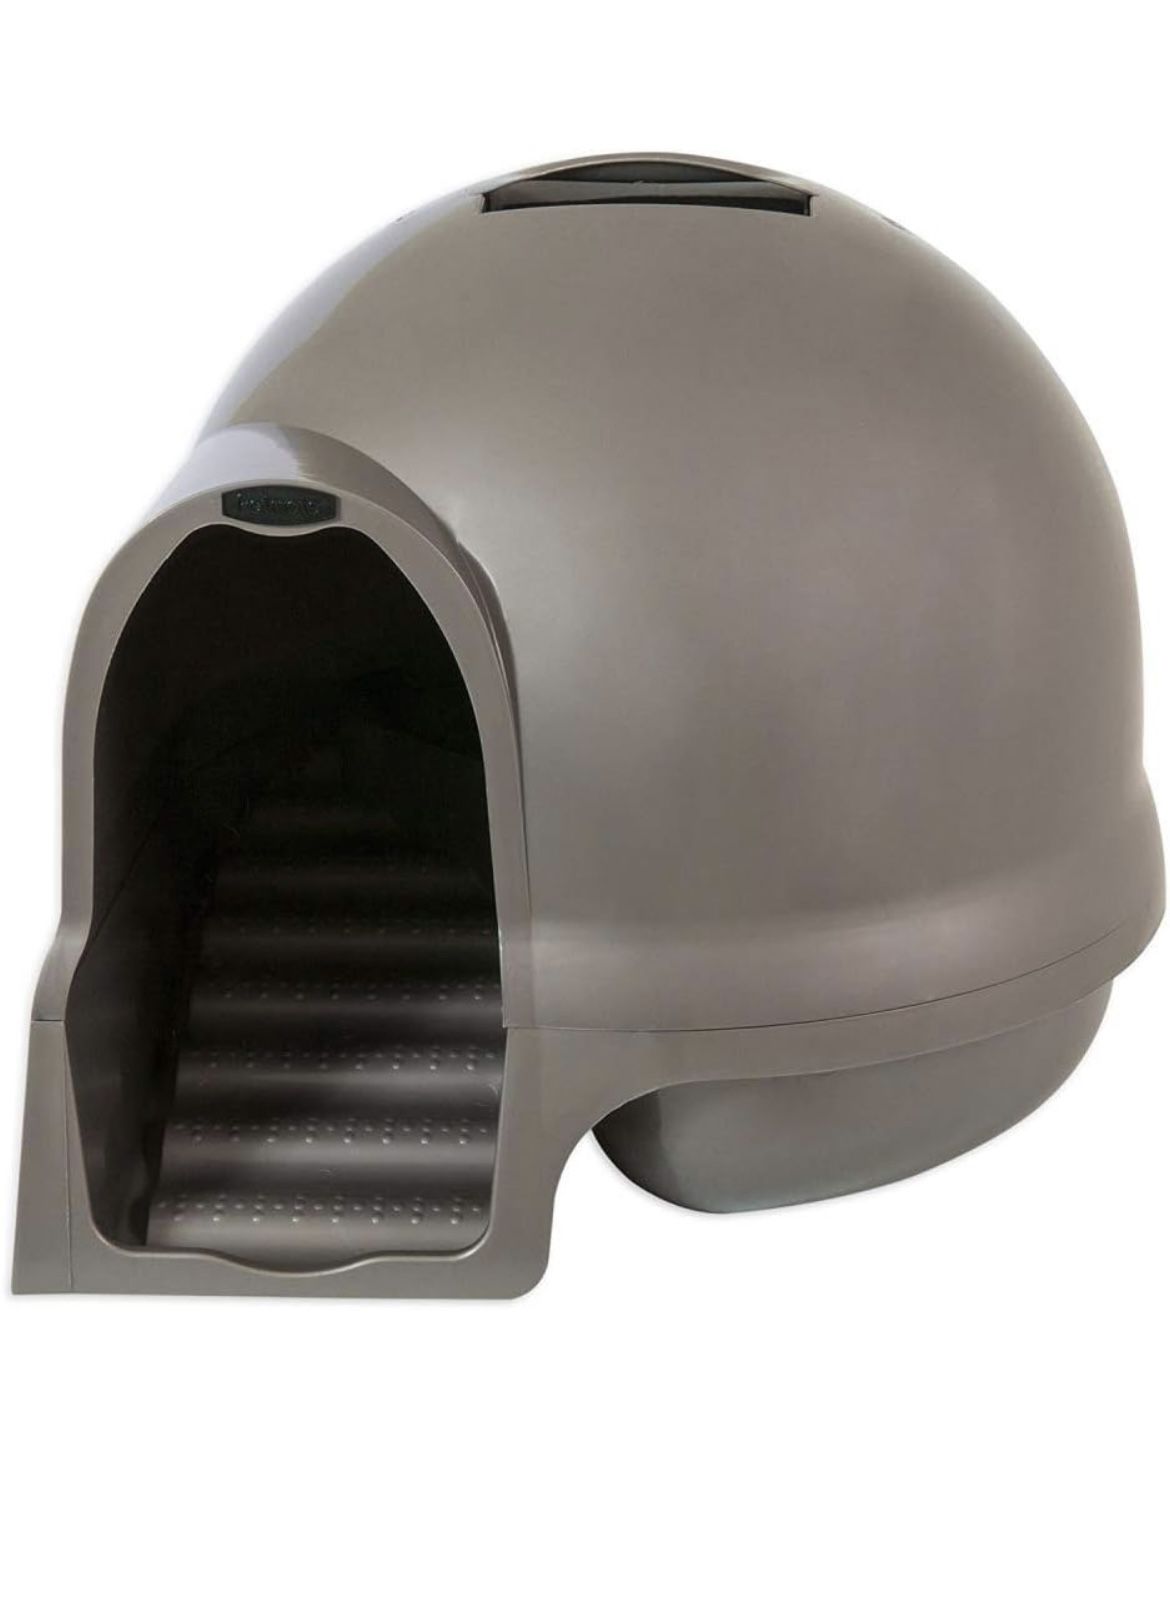 Petmate Booda Clean Step Cat Litter Box Dome (Made in the USA with 95% Recycled Materials)- Brushed Nickel, Made in USA